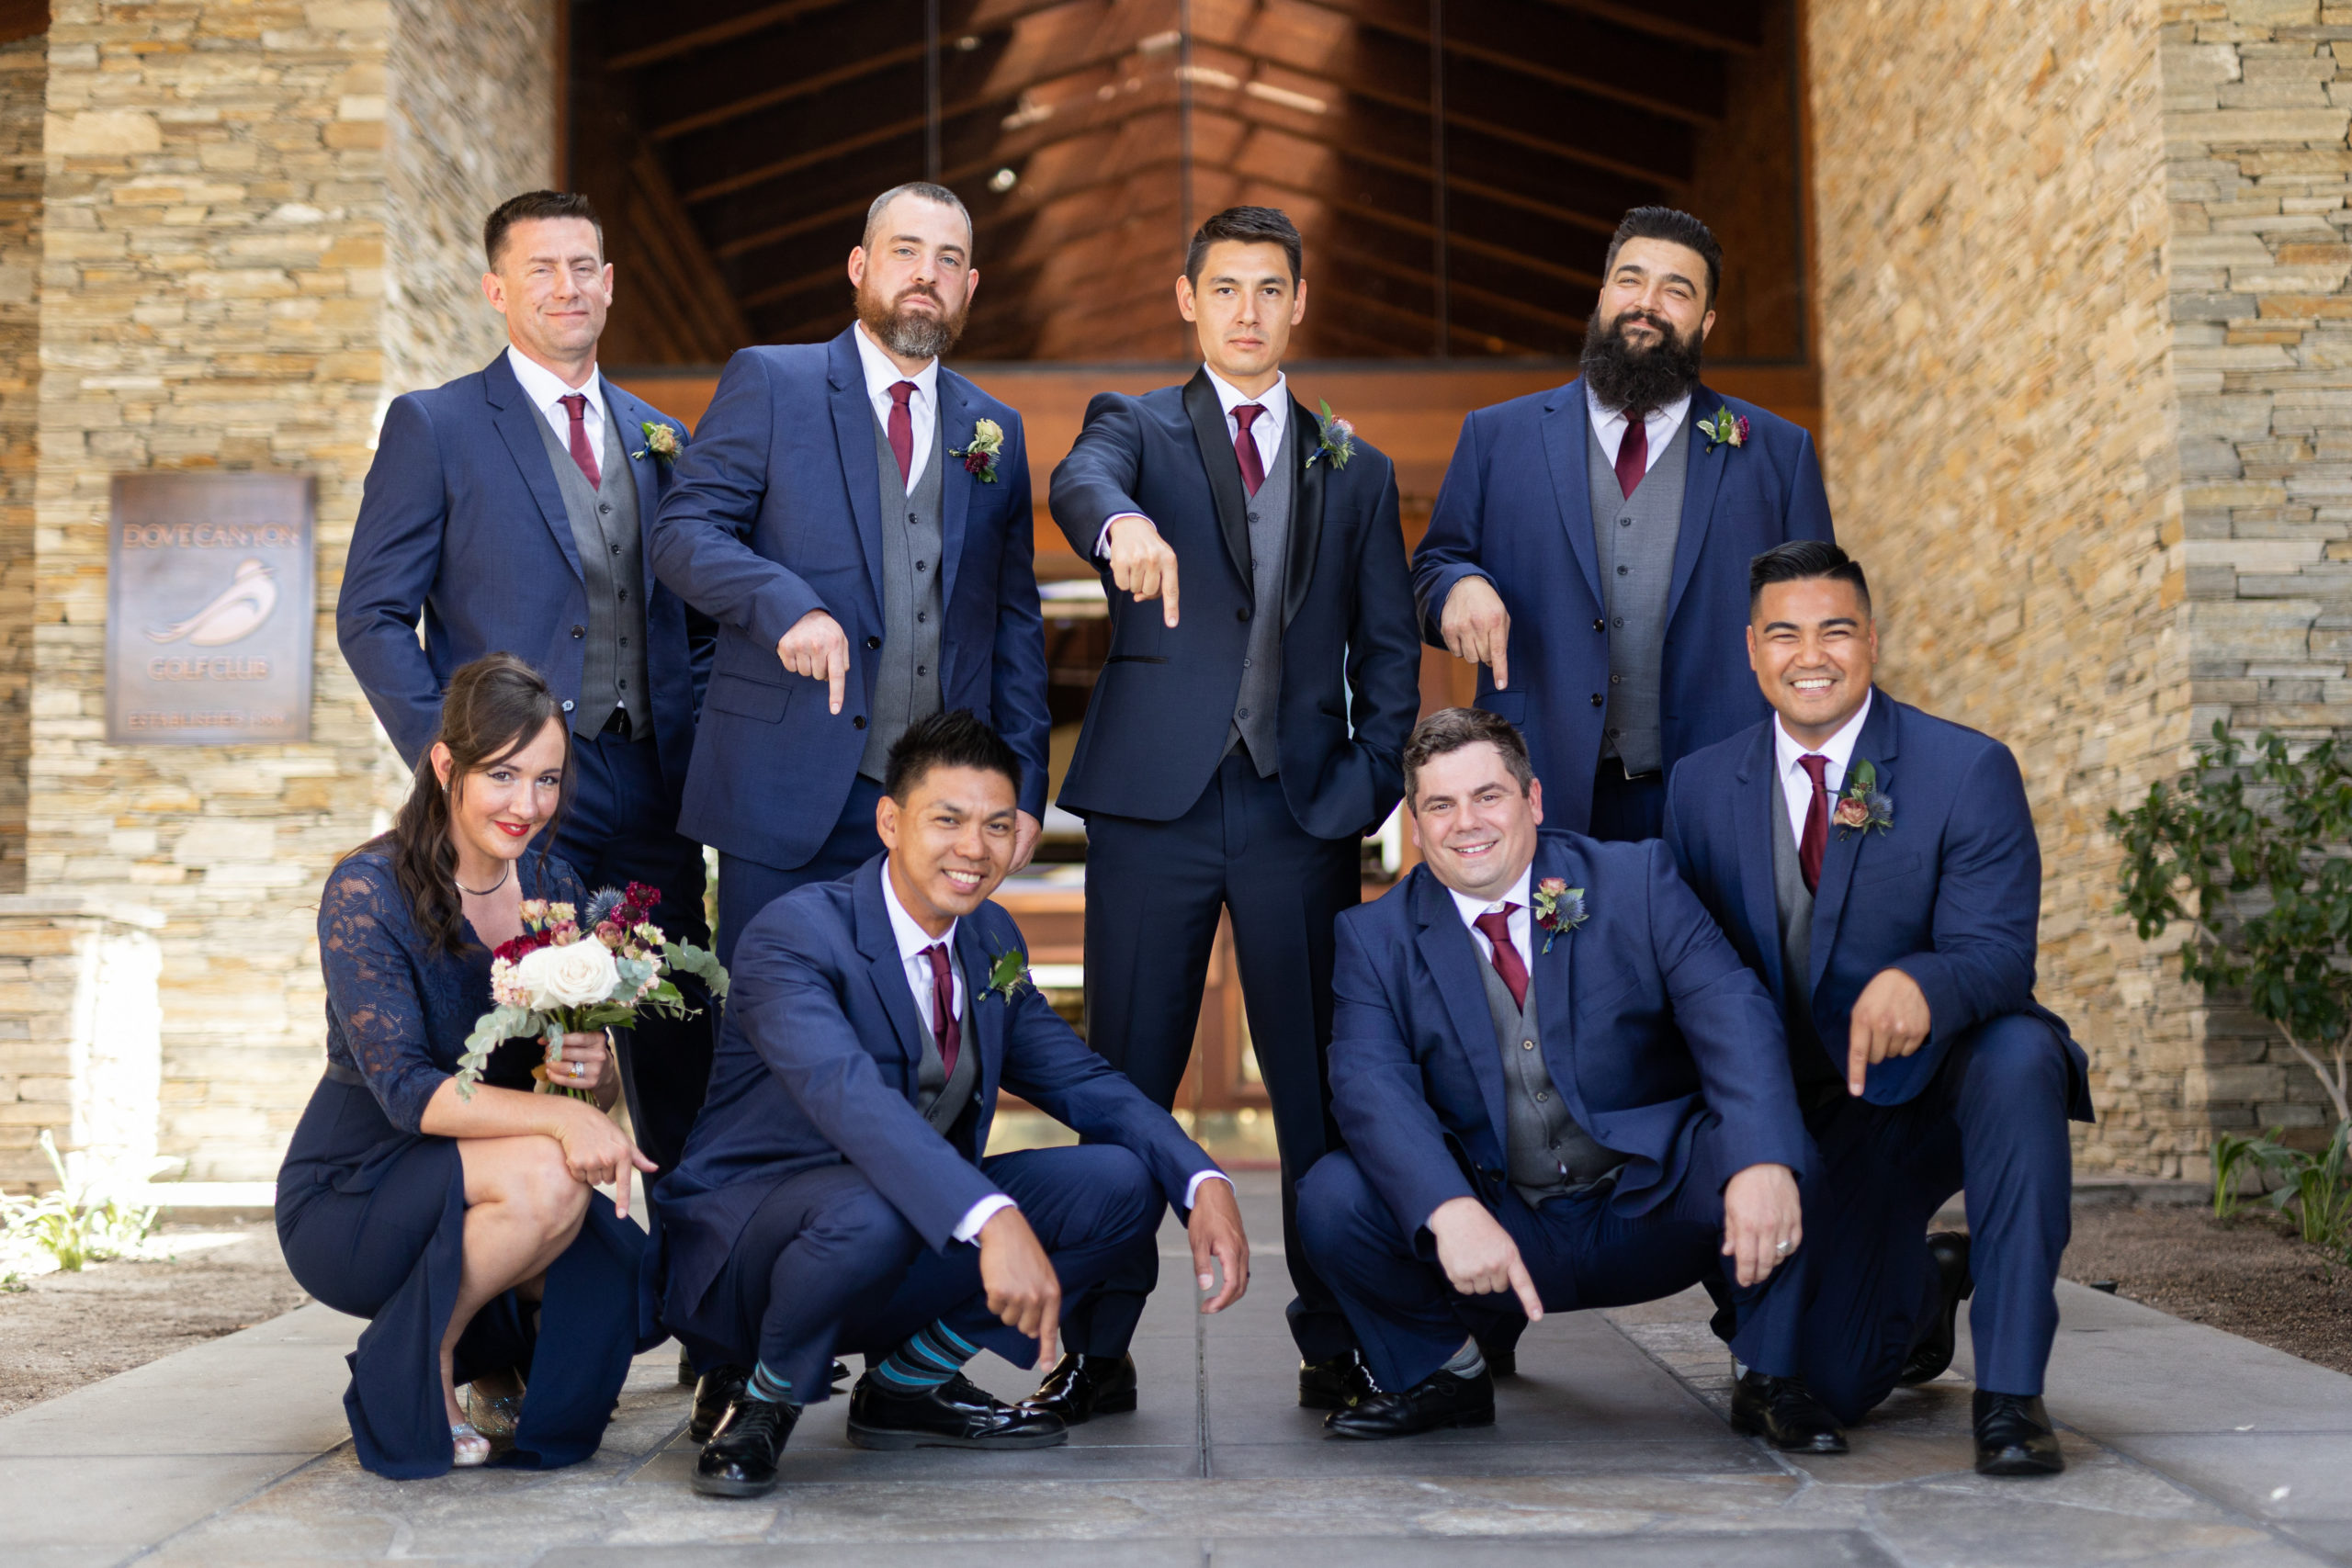 groom in navy tuxedo suit with black lapels, grey vest and maroon tie stand with co-ed wedding party in navy